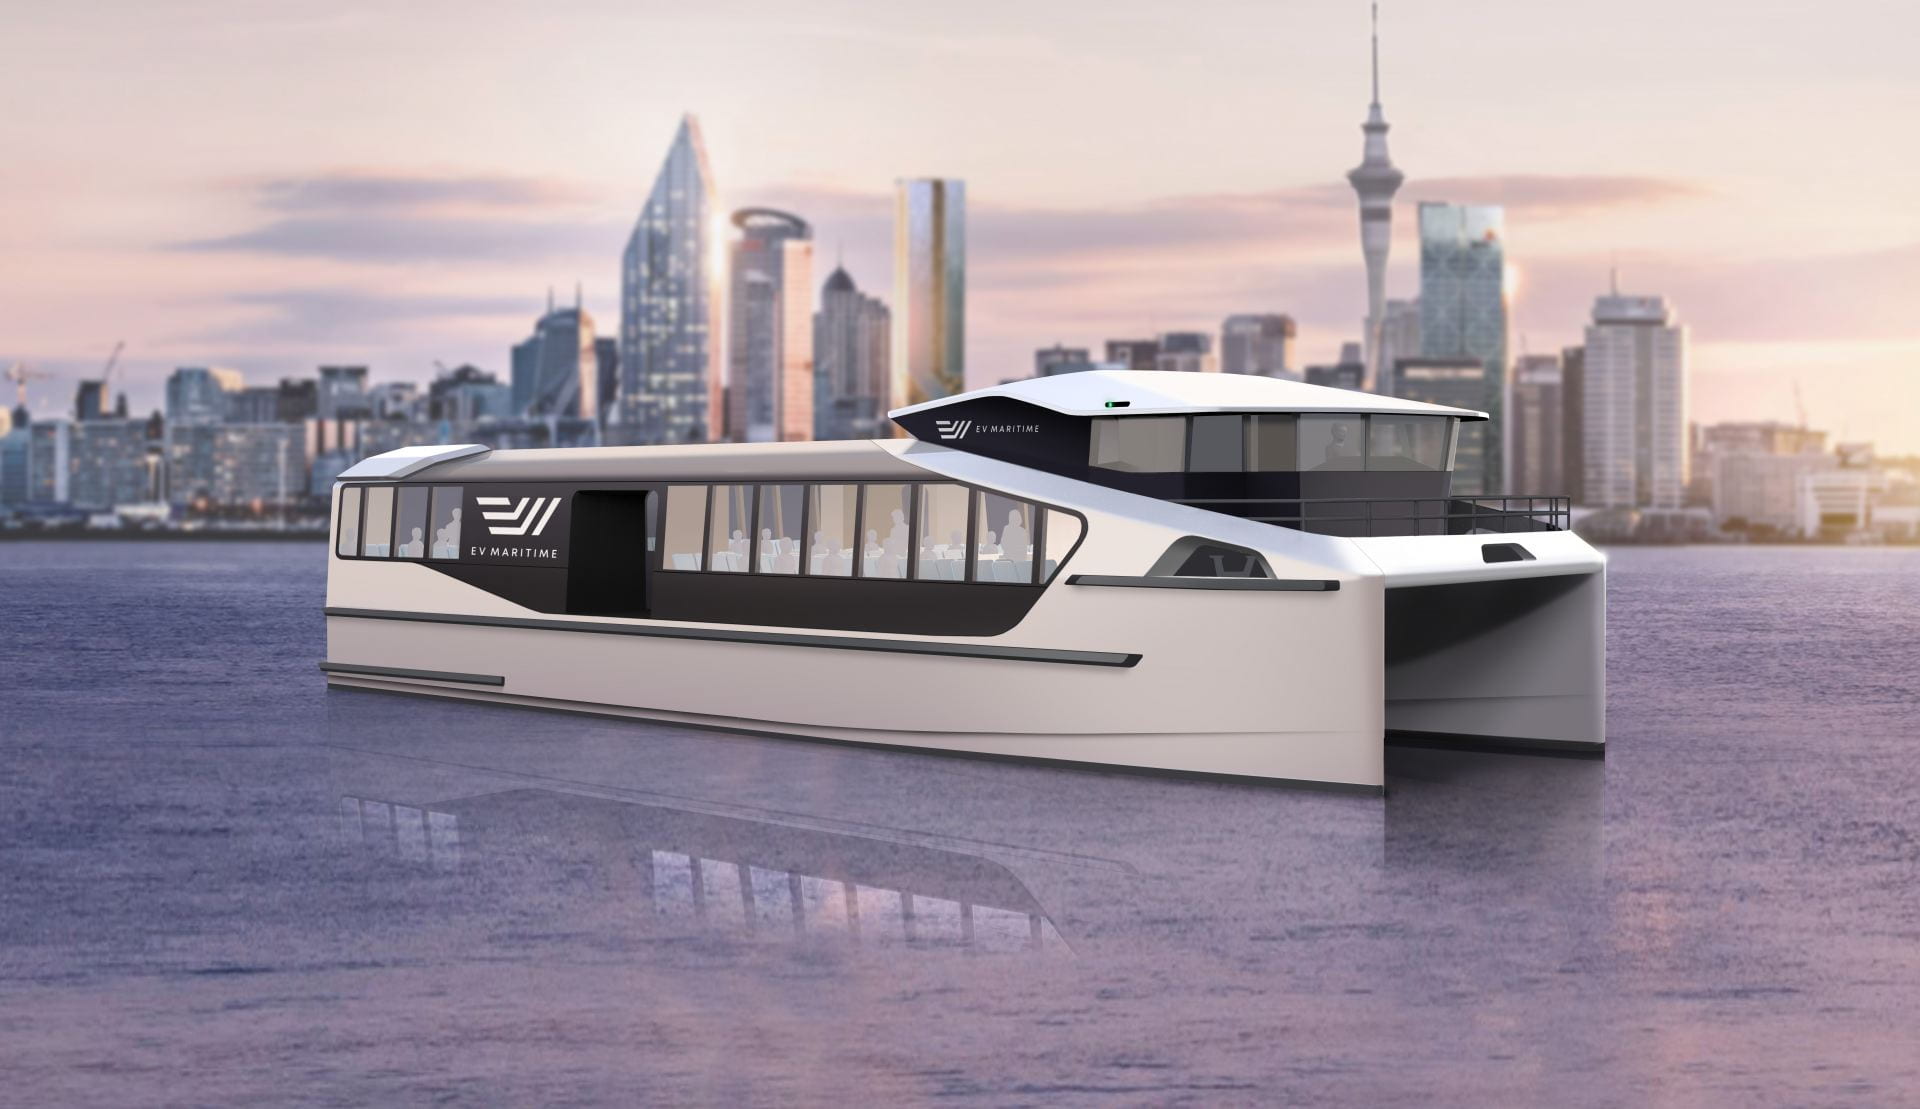 EV Maritime brings electric ferries to Auckland